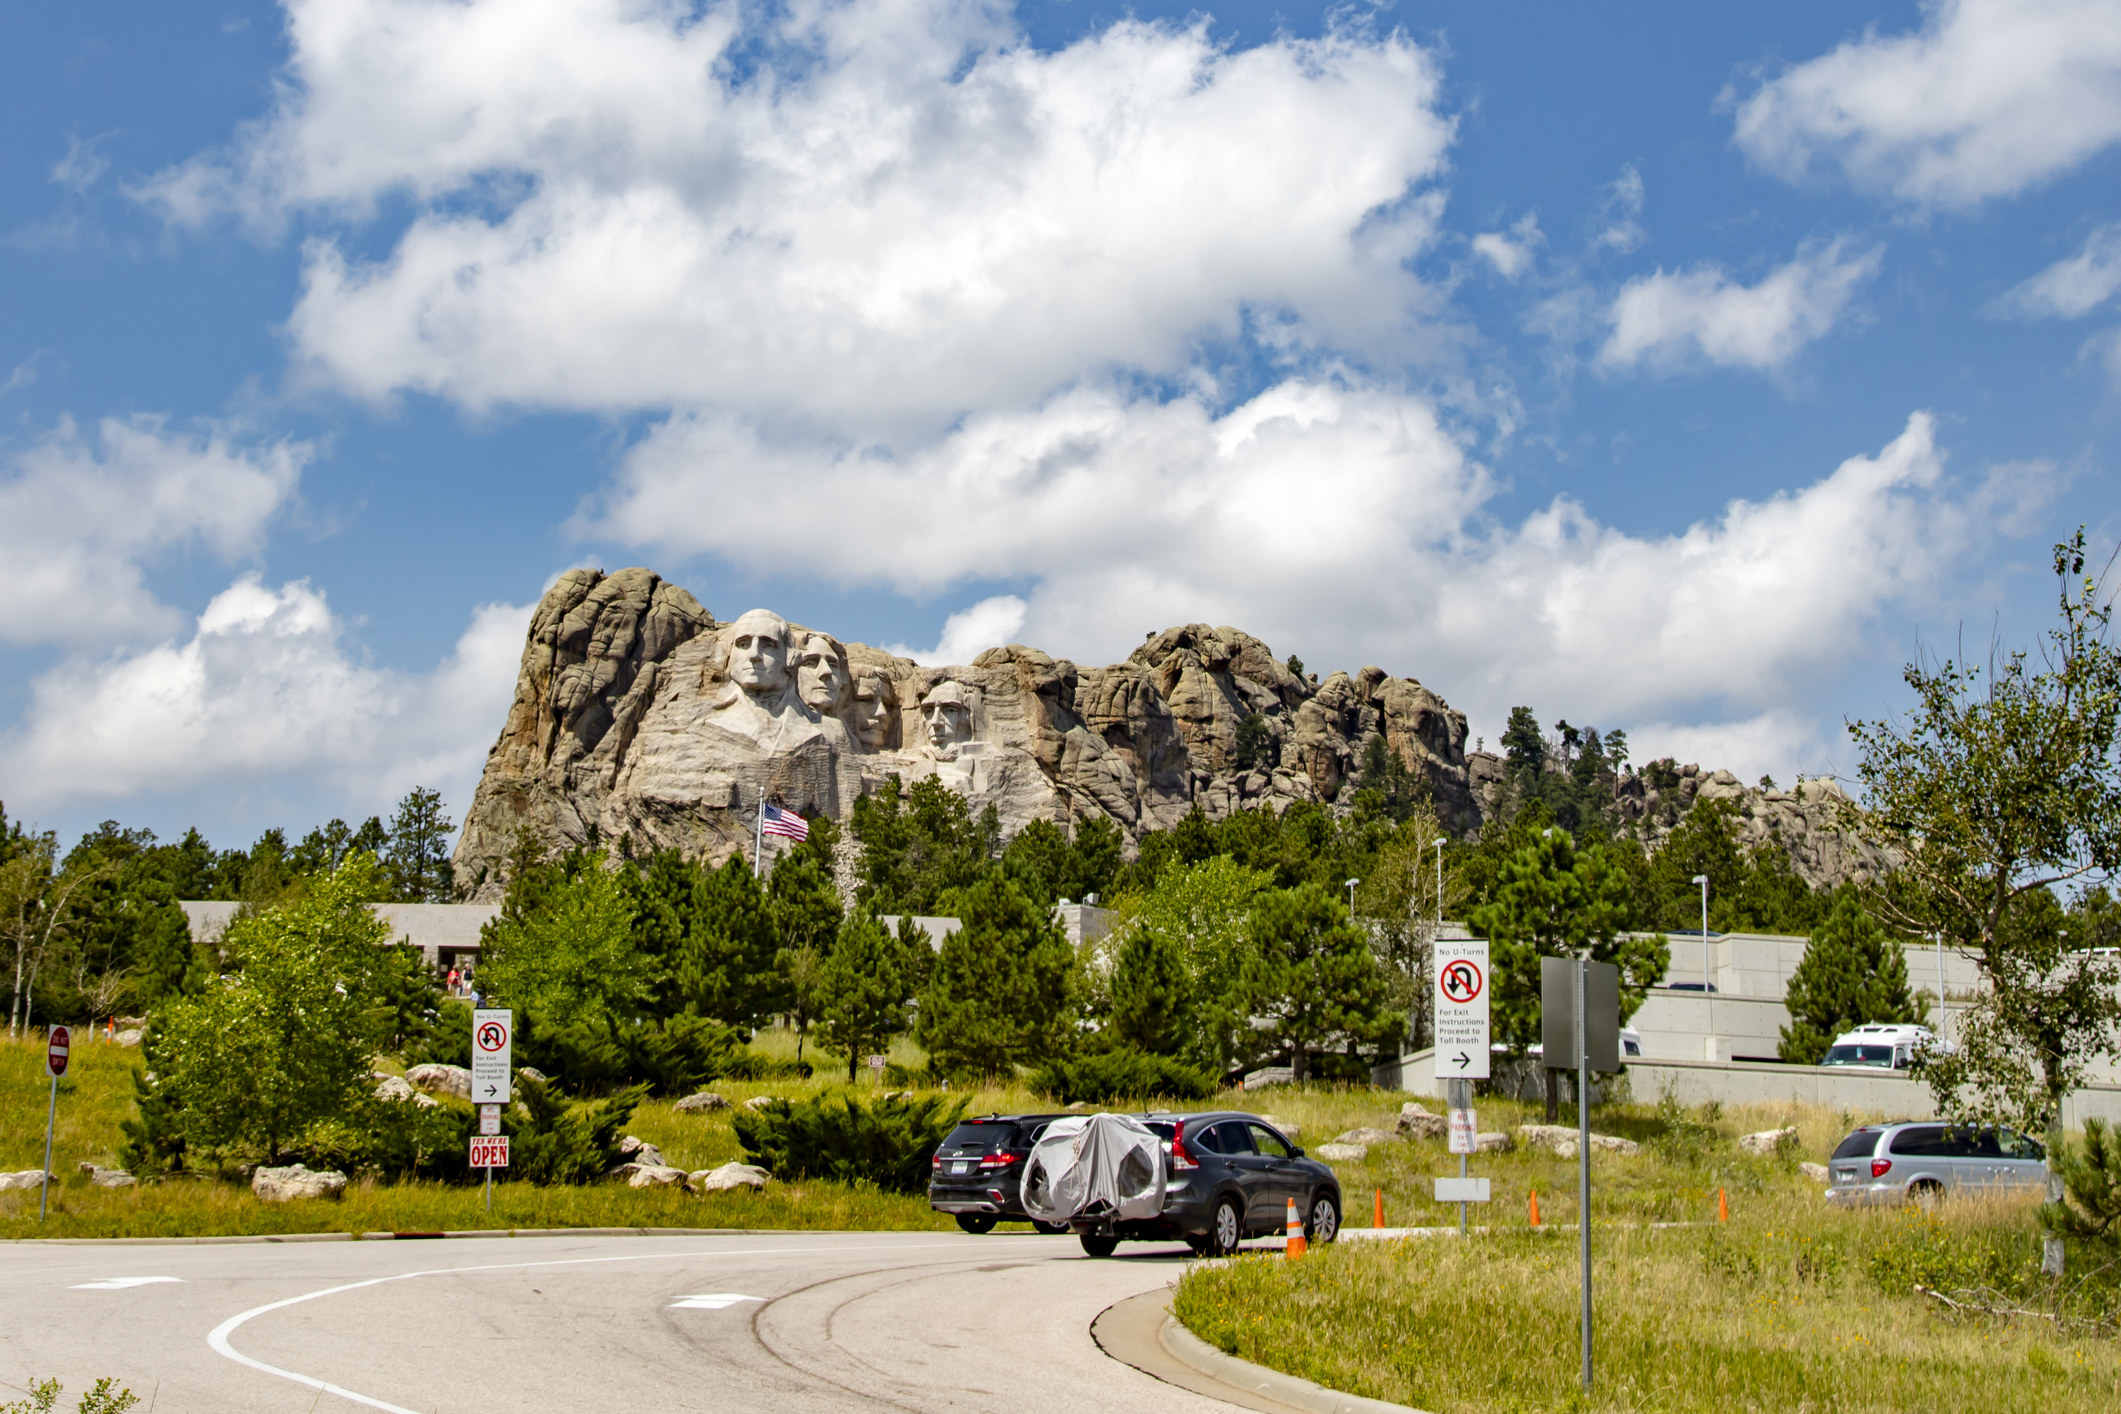 Mt. Rushmore seen from the road